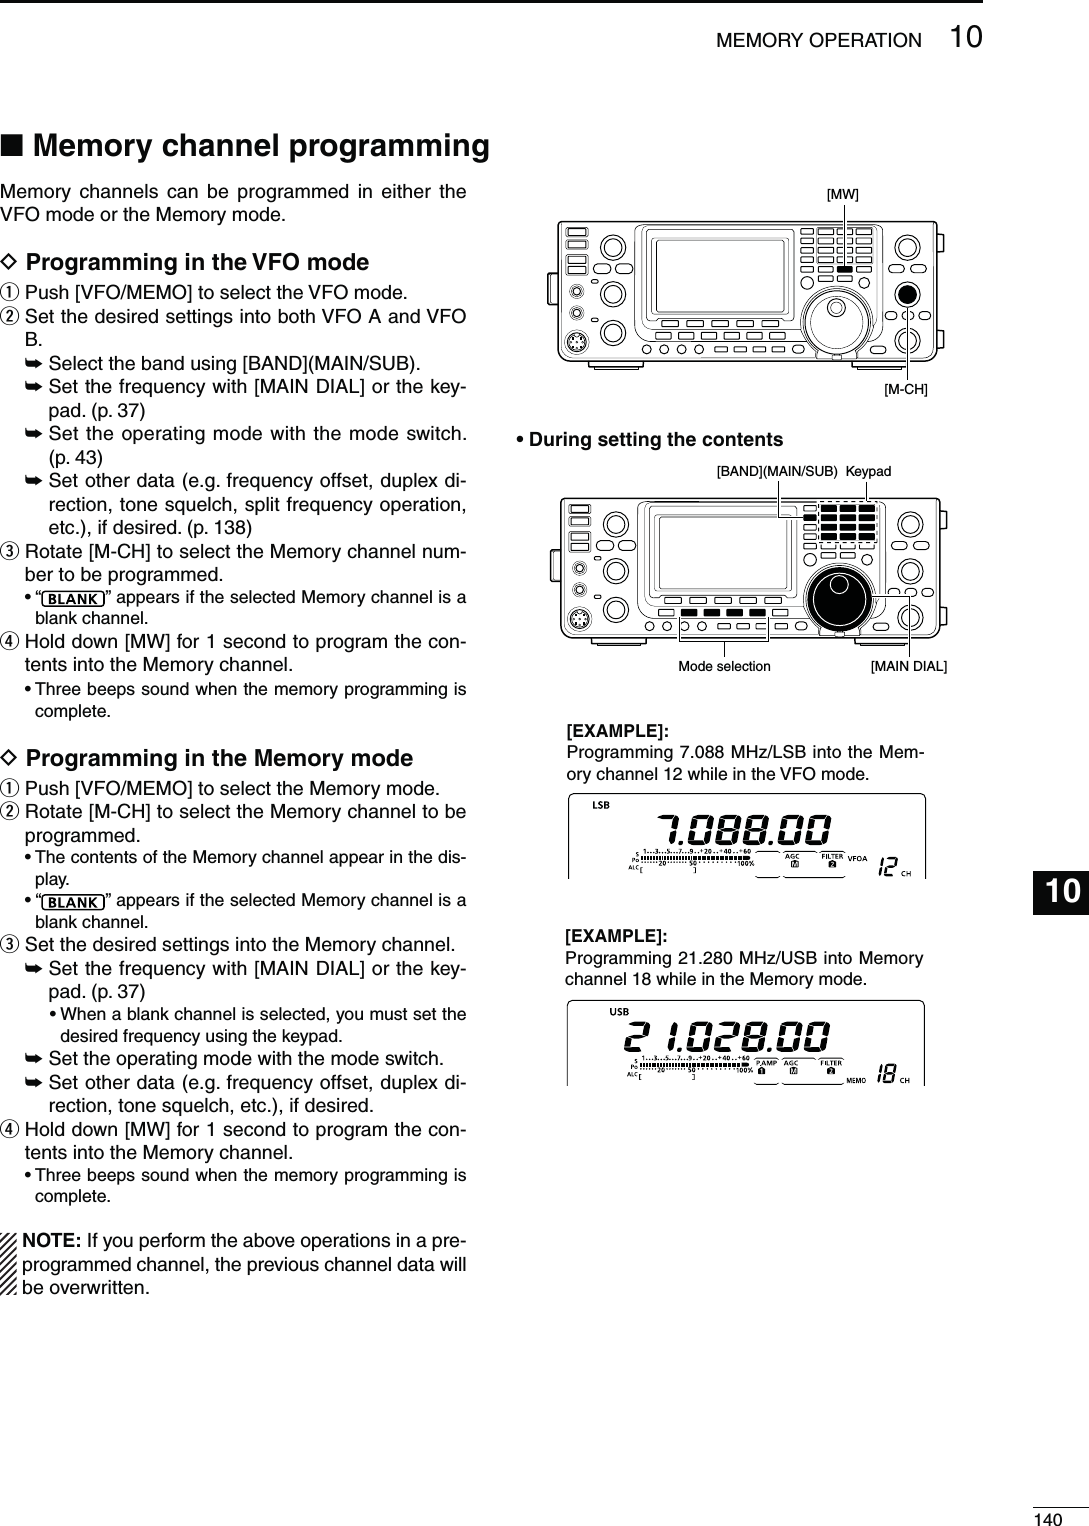 14010-%-/29/0%2!4)/.10Memory channels can be programmed in either the VFO mode or the Memory mode.D0ROGRAMMINGINTHE6&amp;/MODEq Push [VFO/MEMO] to select the VFO mode.w  Set the desired settings into both VFO A and VFO B.± Select the band using [BAND](MAIN/SUB).±  Set the frequency with [MAIN DIAL] or the key-pad. (p. 37)±  Set the operating mode with the mode switch.  (p. 43)±  Set other data (e.g. frequency offset, duplex di-rection, tone squelch, split frequency operation, etc.), if desired. (p. 138)e  Rotate [M-CH] to select the Memory channel num-ber to be programmed.sh” appears if the selected Memory channel is a blank channel.r  Hold down [MW] for 1 second to program the con-tents into the Memory channel.s4HREEBEEPSSOUNDWHENTHEmemory programming is complete.D0ROGRAMMINGINTHE-EMORYMODEq Push [VFO/MEMO] to select the Memory mode.w  Rotate [M-CH] to select the Memory channel to be programmed.s4HECONTENTSOFTHE-EMORYCHANNELAPPEARINTHEDIS-play.sh” appears if the selected Memory channel is a blank channel.e Set the desired settings into the Memory channel.±  Set the frequency with [MAIN DIAL] or the key-pad. (p. 37)s7HENABLANKCHANNELISSELECTEDYOUMUSTSETTHEdesired frequency using the keypad.± Set the operating mode with the mode switch.±  Set other data (e.g. frequency offset, duplex di-rection, tone squelch, etc.), if desired.r  Hold down [MW] for 1 second to program the con-tents into the Memory channel.s4HREEBEEPSSOUNDWHENTHEMEMORYPROGRAMMINGIScomplete.NOTE: If you perform the above operations in a pre-programmed channel, the previous channel data will be overwritten.N-EMORYCHANNELPROGRAMMING[MW] [M-CH][EXAMPLE]:Programming 7.088 MHz/LSB into the Mem-ory channel 12 while in the VFO mode.[EXAMPLE]:Programming 21.280 MHz/USB into Memory channel 18 while in the Memory mode.s$URINGSETTINGTHECONTENTS[MAIN DIAL]Keypad[BAND](MAIN/SUB)Mode selection